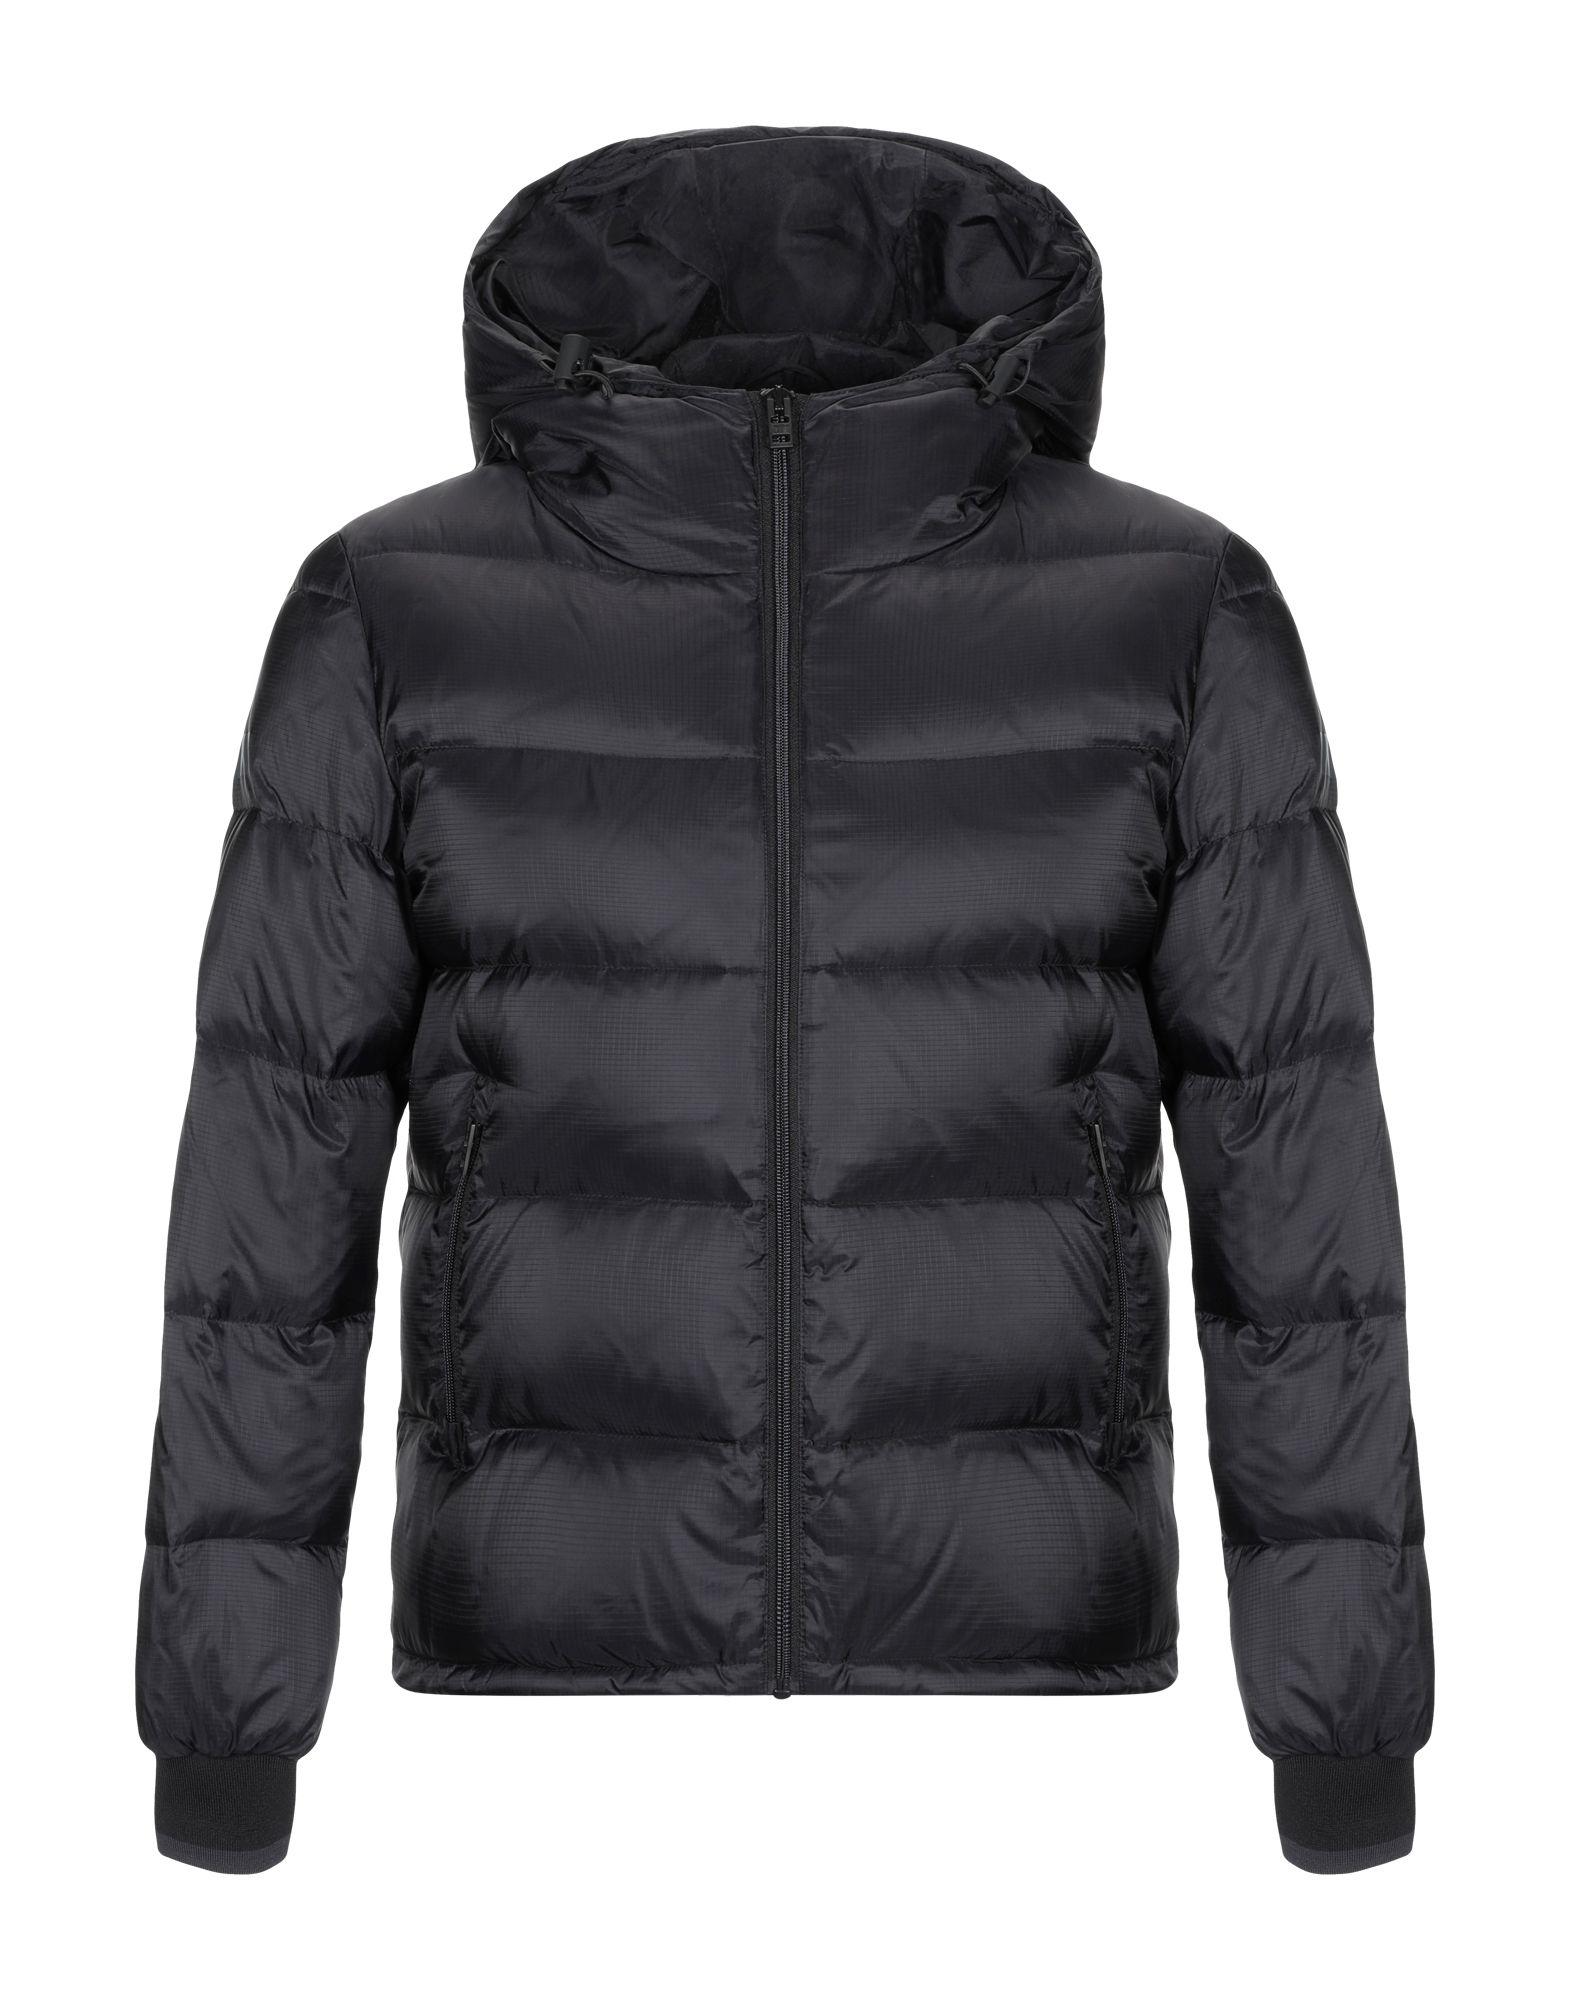 Patrizia Pepe Synthetic Down Jacket in Black for Men - Lyst